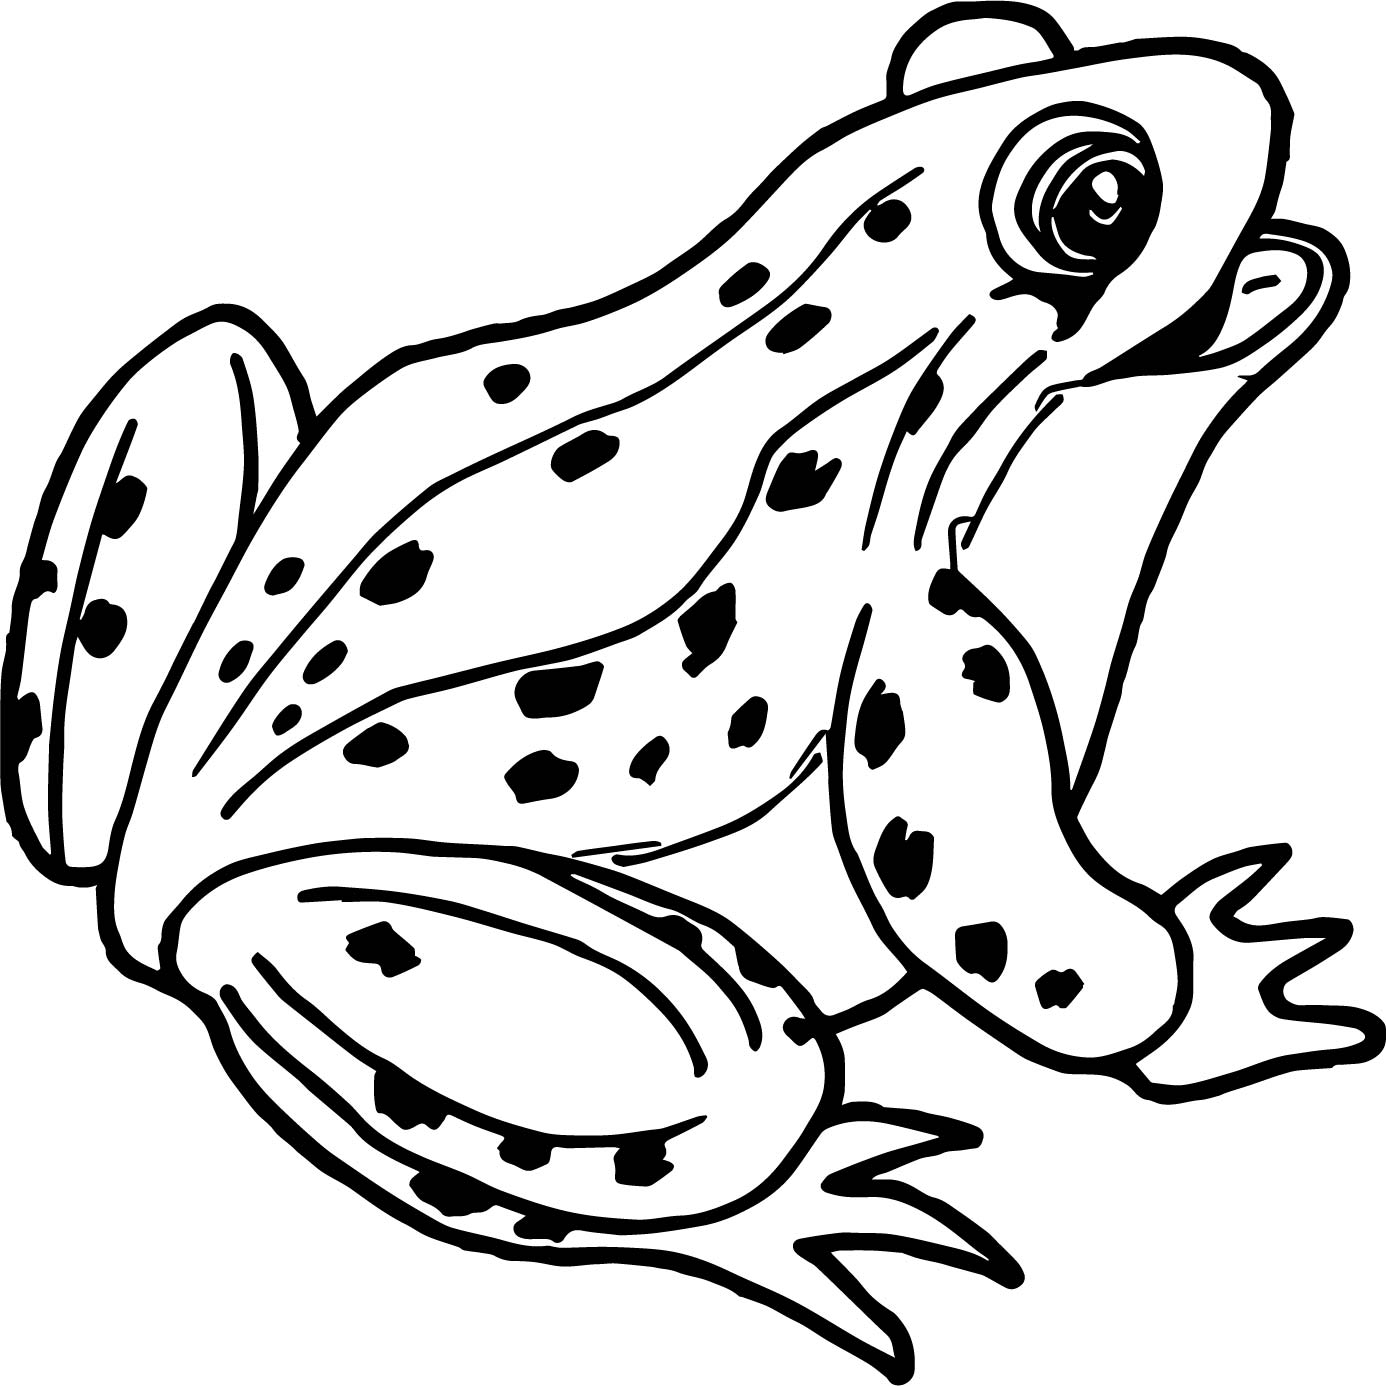 tree-frog-coloring-pages-free-download-on-clipartmag